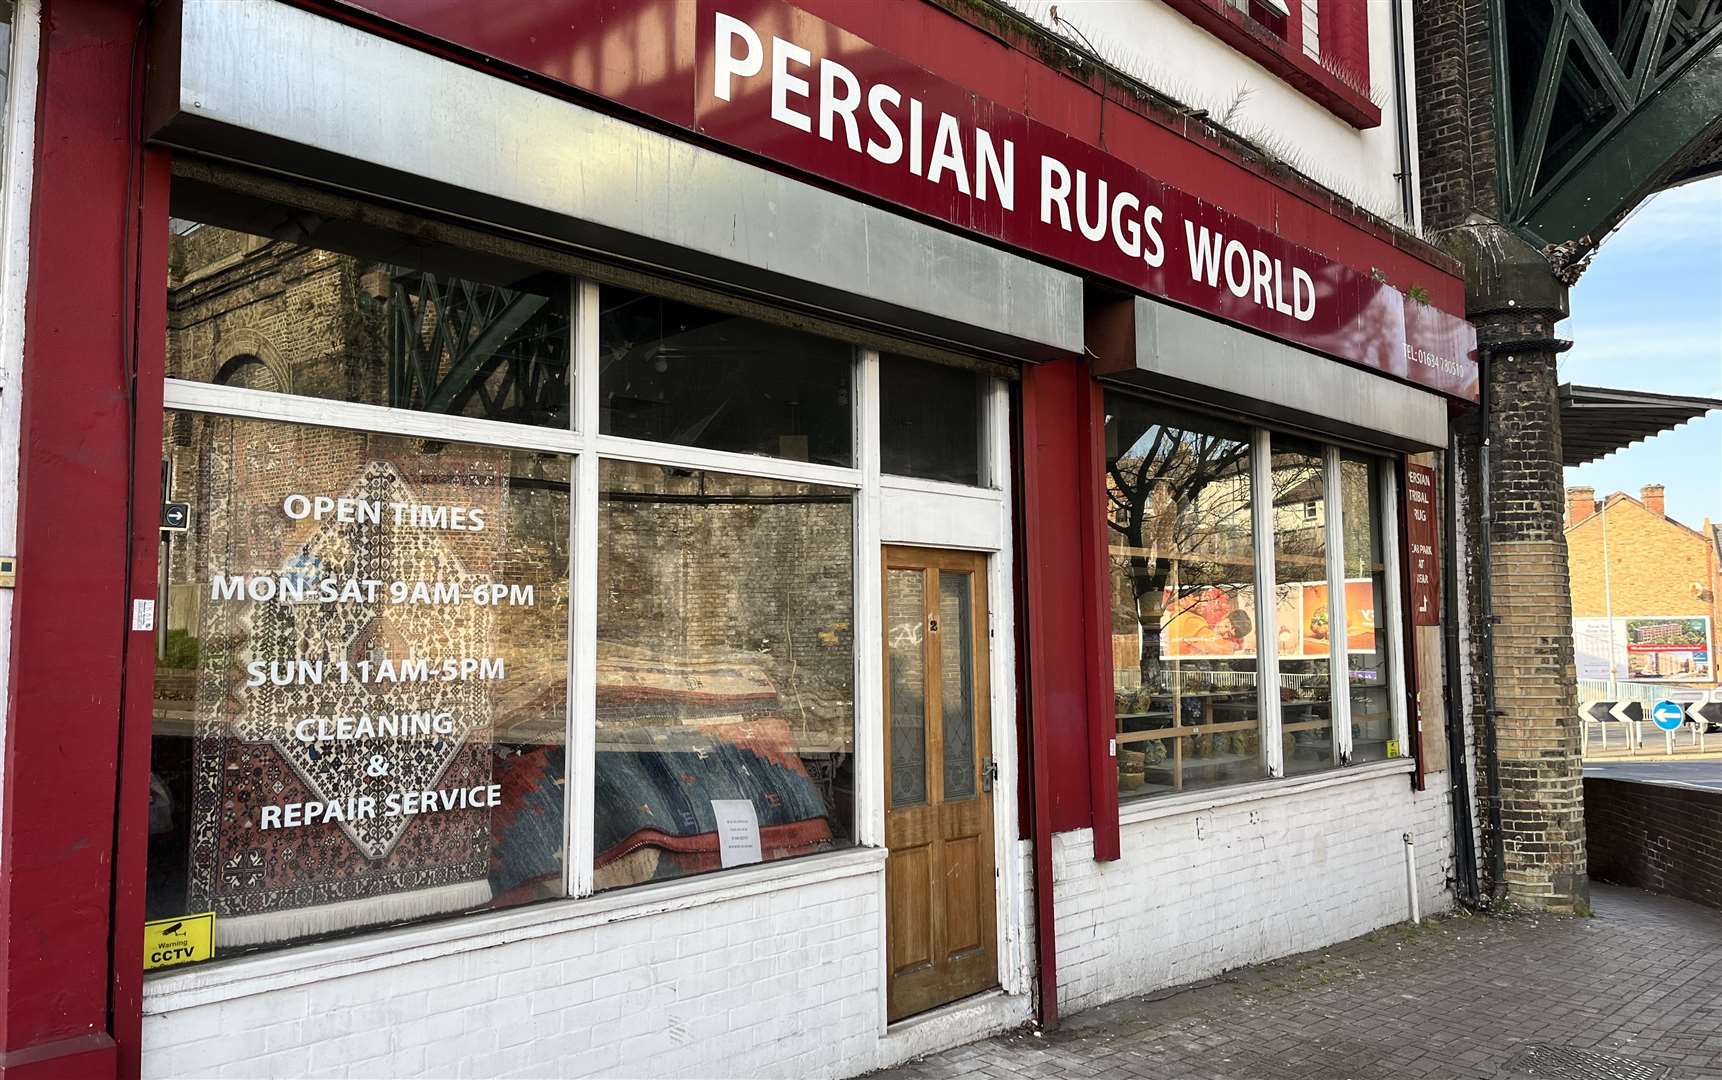 Persian Rugs Worlds has been doing good business under the Luton arches in Chatham for years